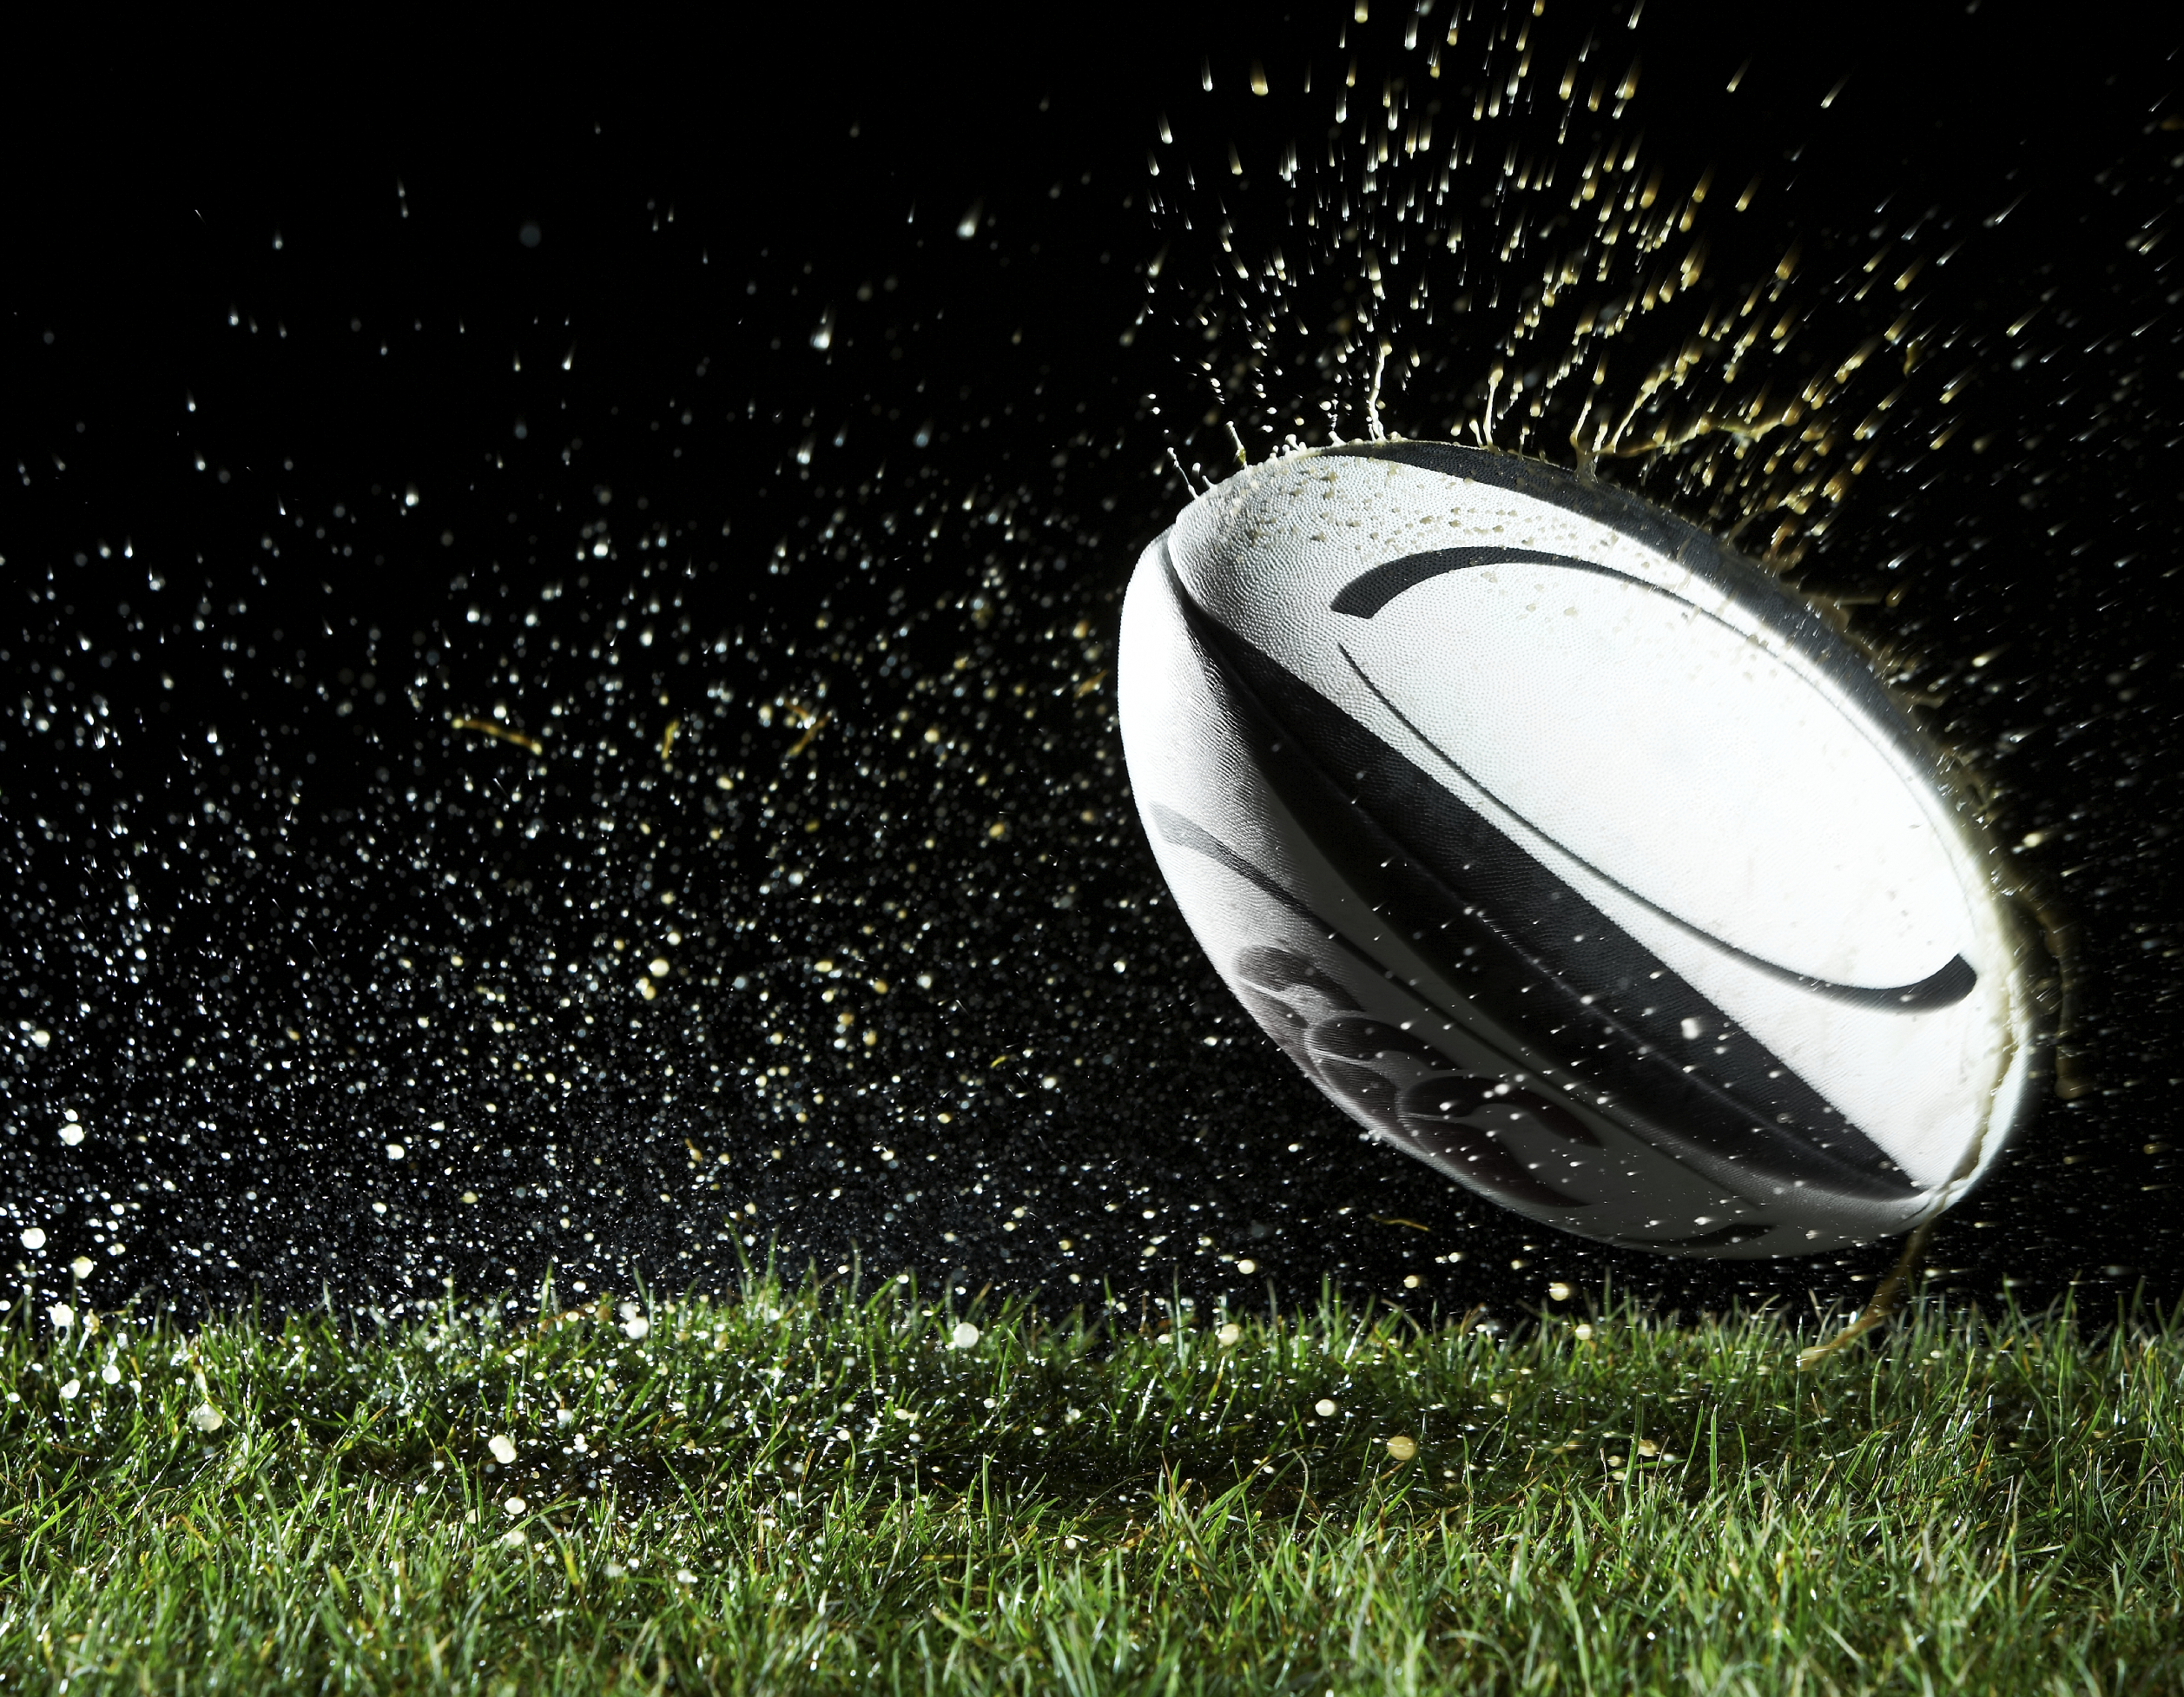 Businesses should embrace the Rugby World Cup